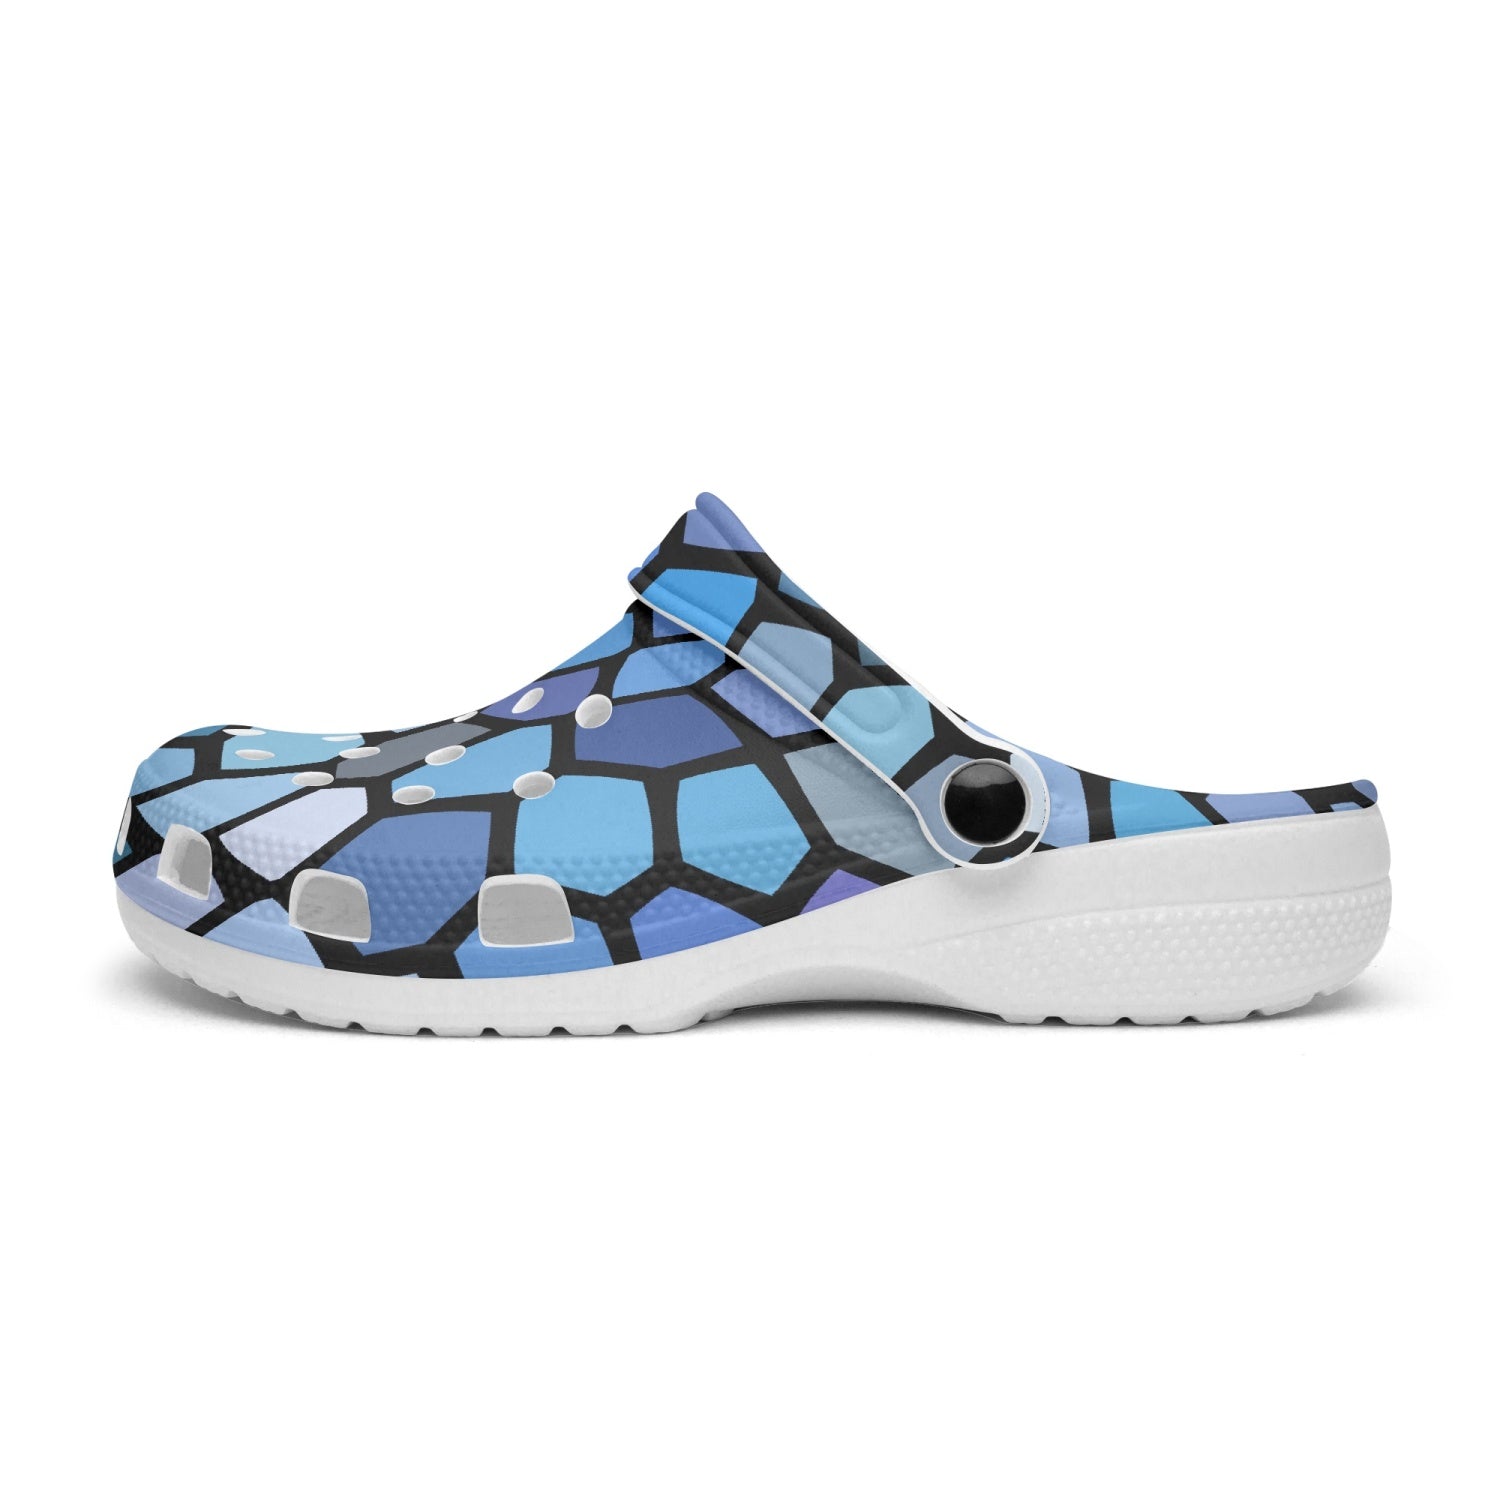 Blue Stained Glass Unisex White Rubber Clogs